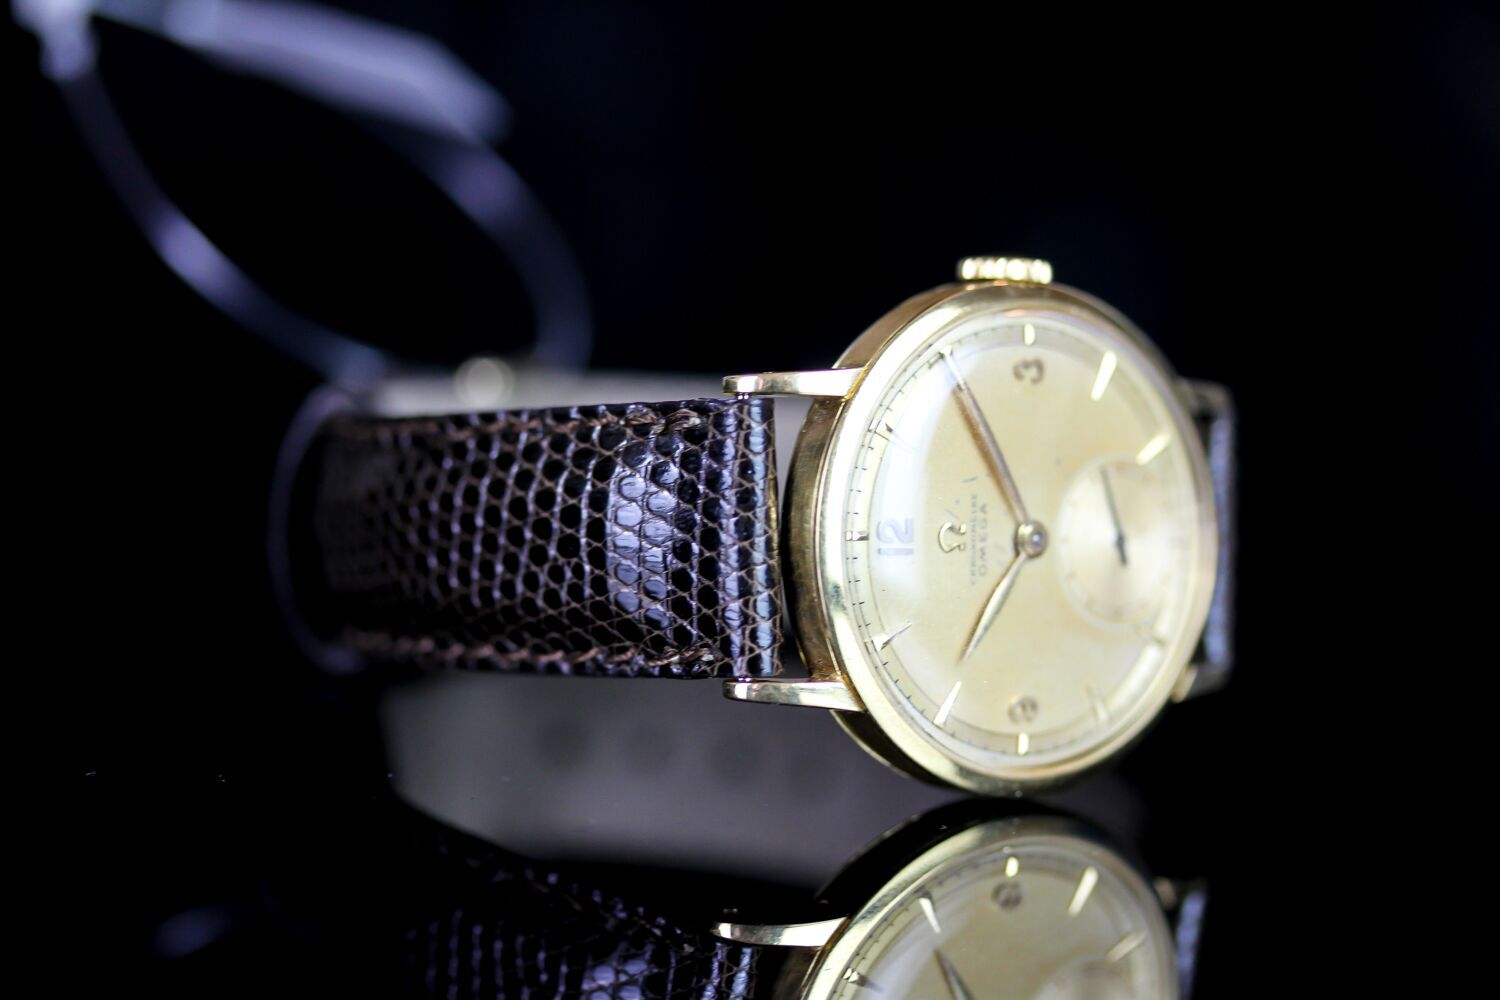 GENTLEMENS OMEGA CHRONOMETRE 18CT GOLD WRISTWATCH CIRCA 1944, circular patina gold dial with faceted - Image 2 of 2